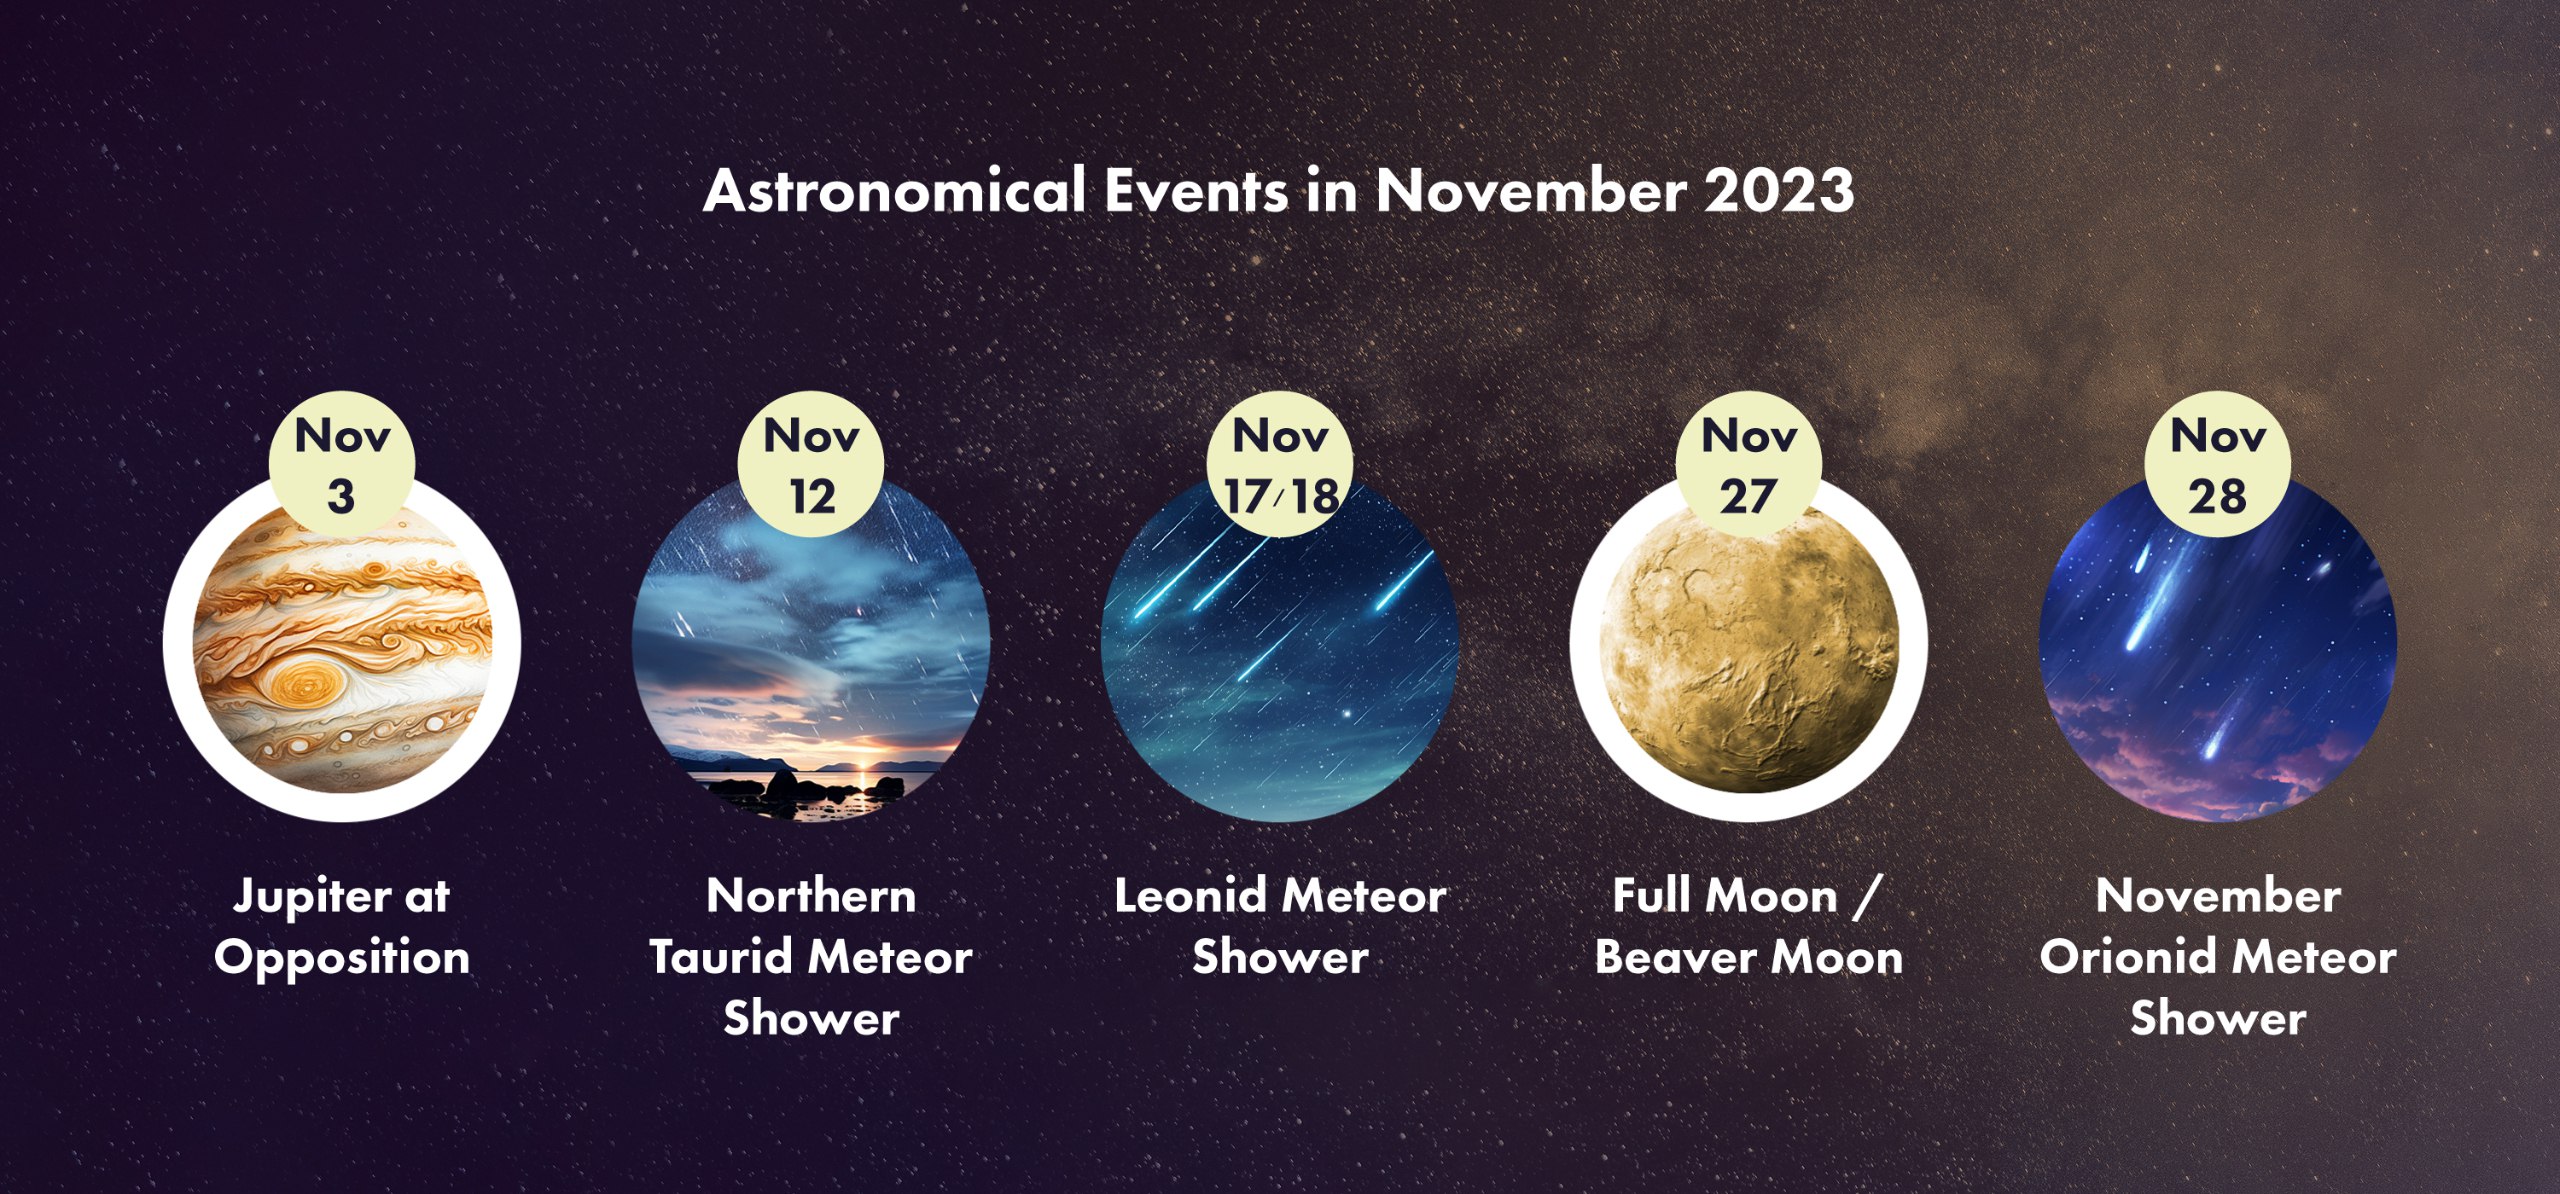 Astronomical Events in November 2023: Your Stargazing Calendar for This Month